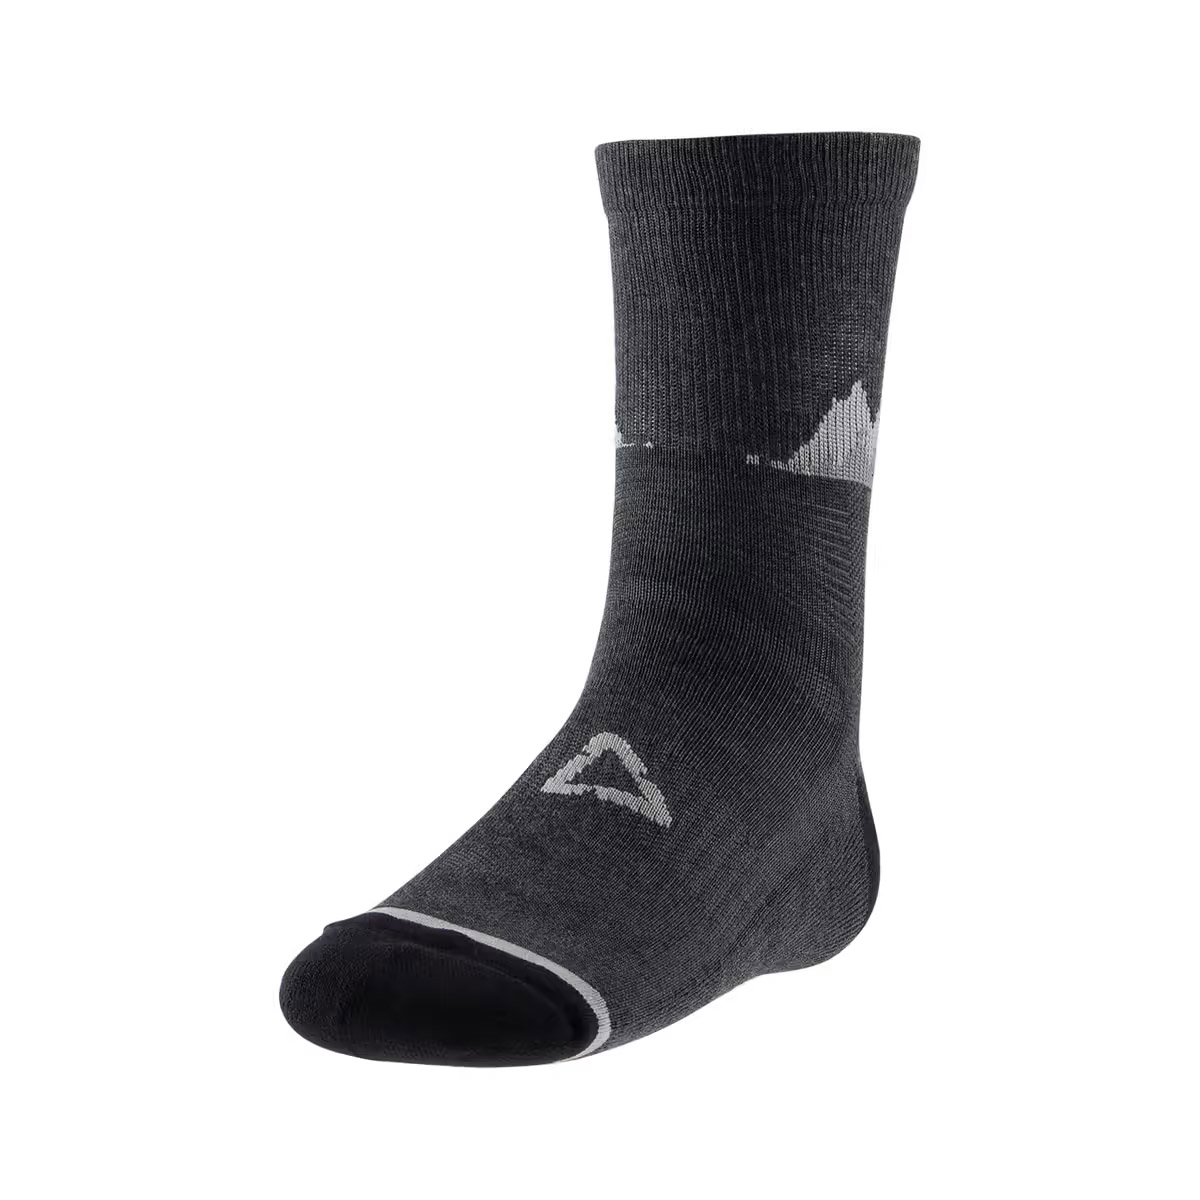 Calcetines Mtb Reforzados Gris Talla S/M (38-42)